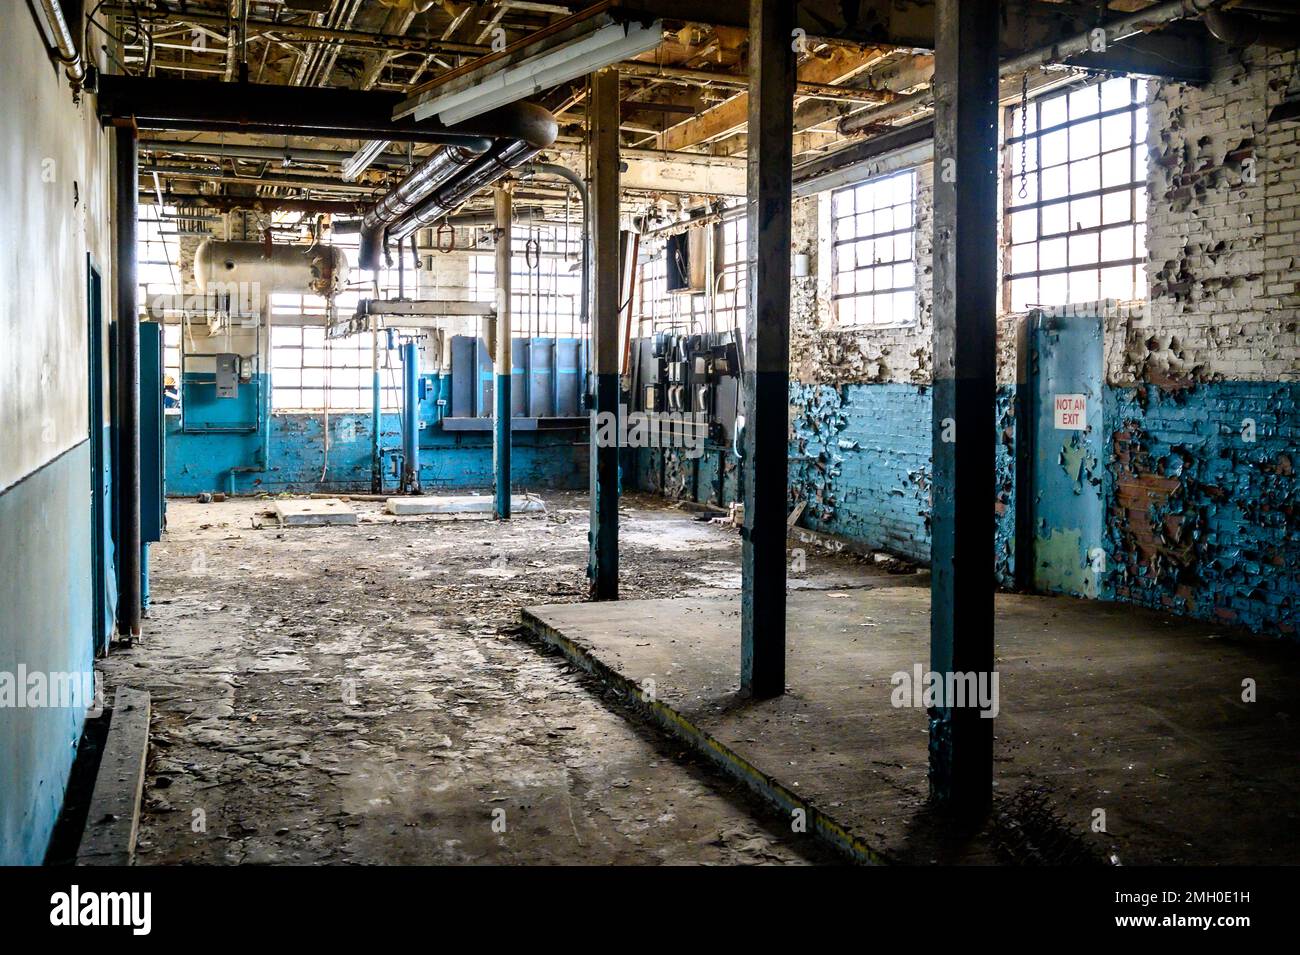 Interior space, abandoned manufacturing facility. Stock Photo